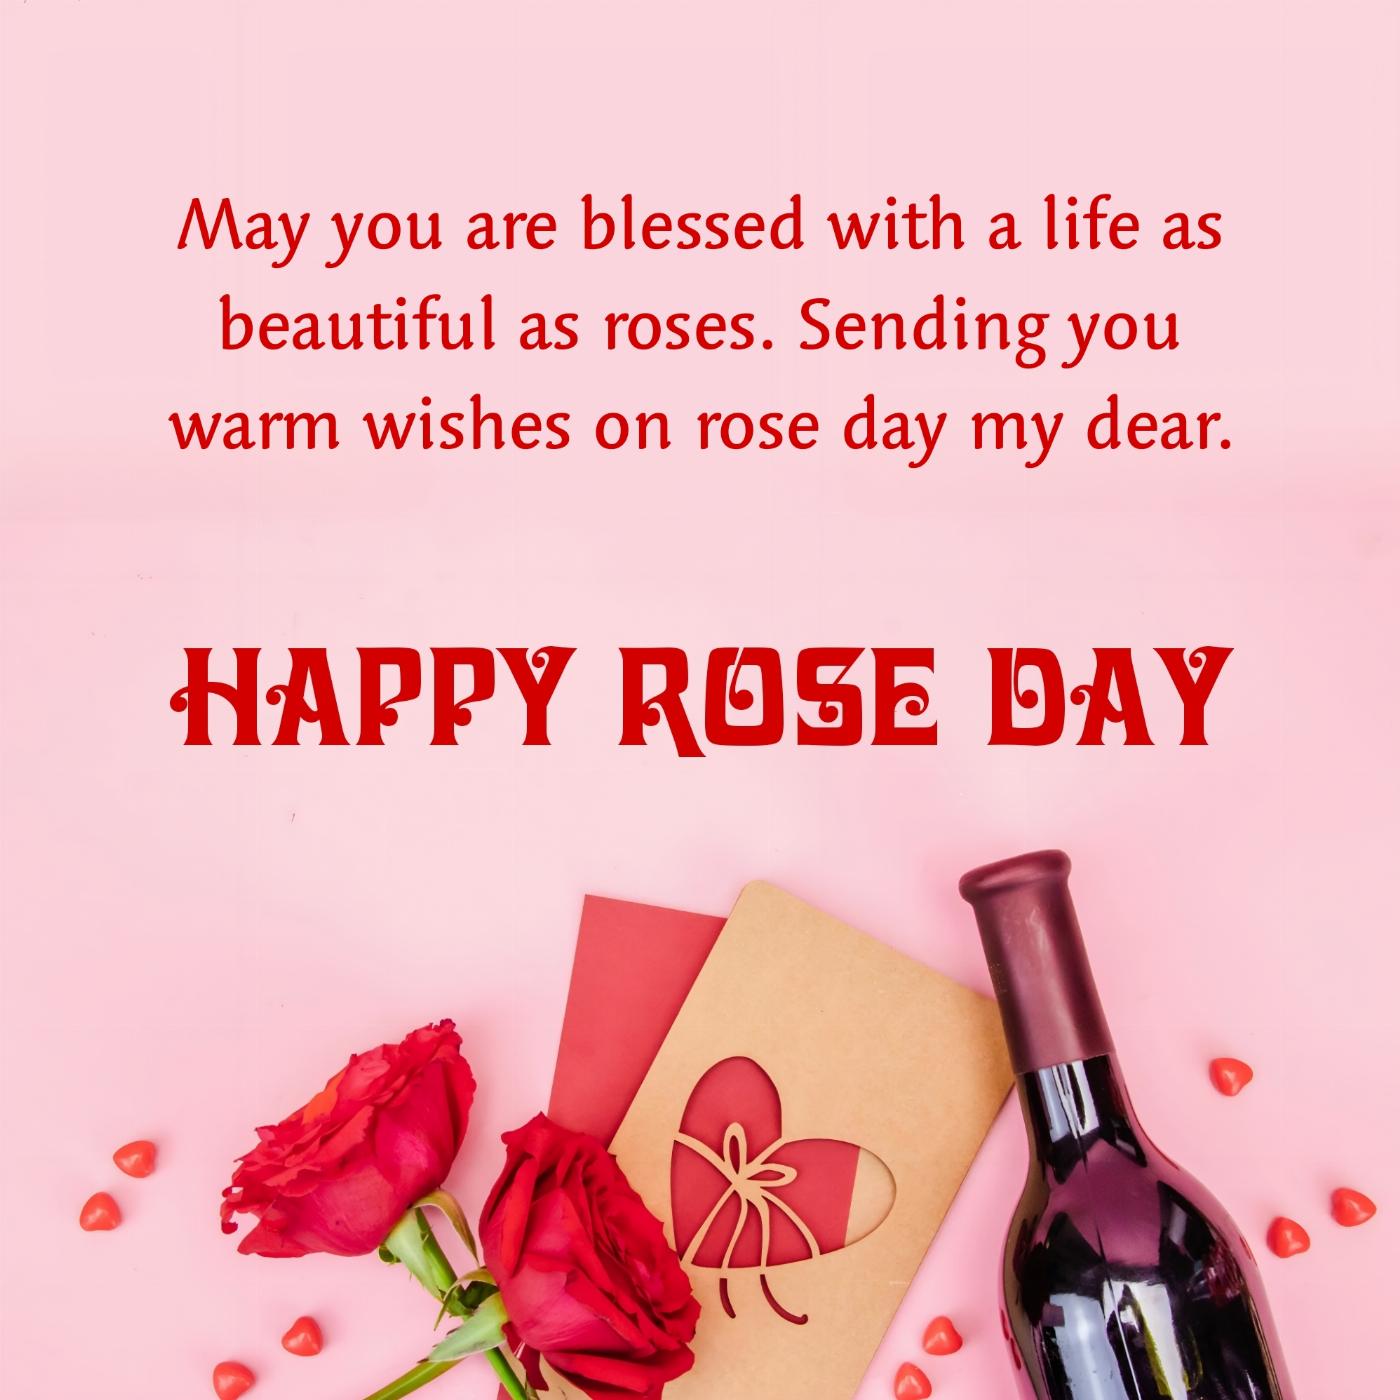 May you are blessed with a life as beautiful as roses